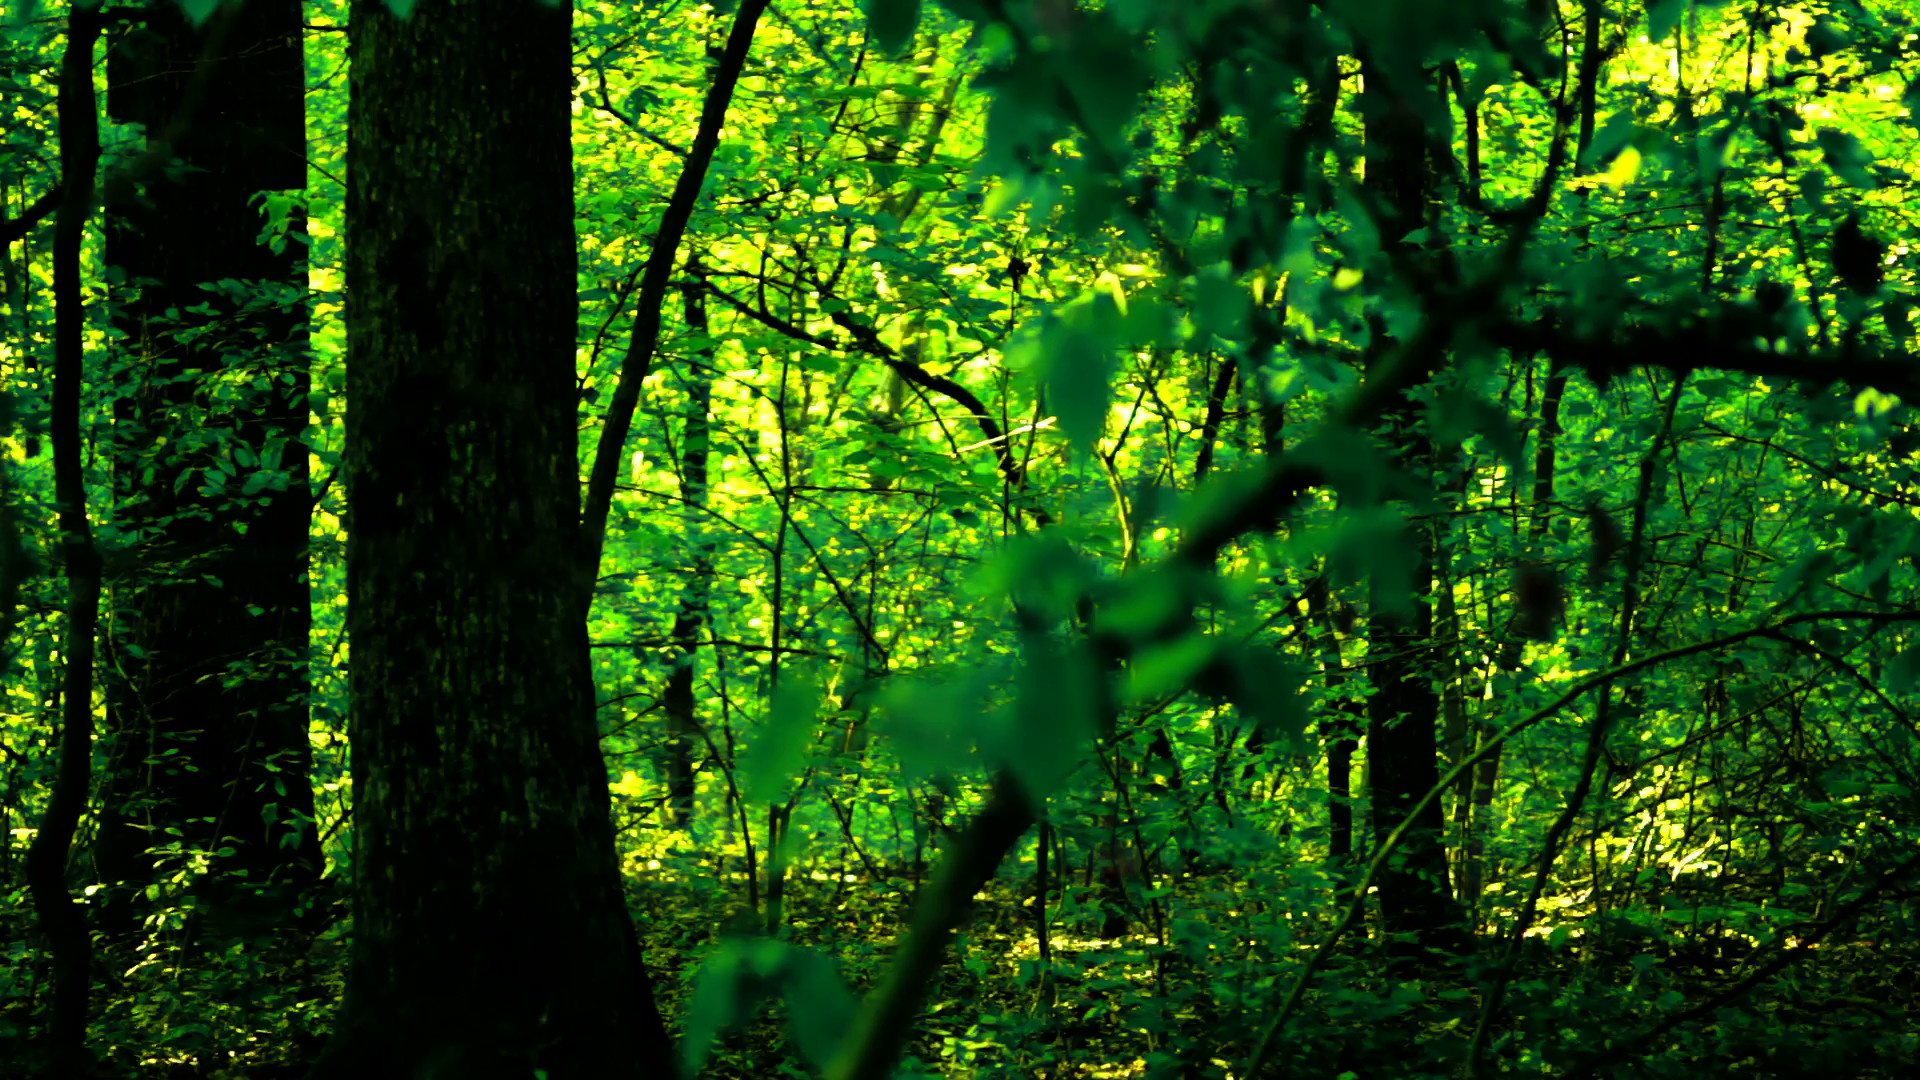 1920x1080 Woods forest, trees background, green nature landscape, wilderness, august,  pan